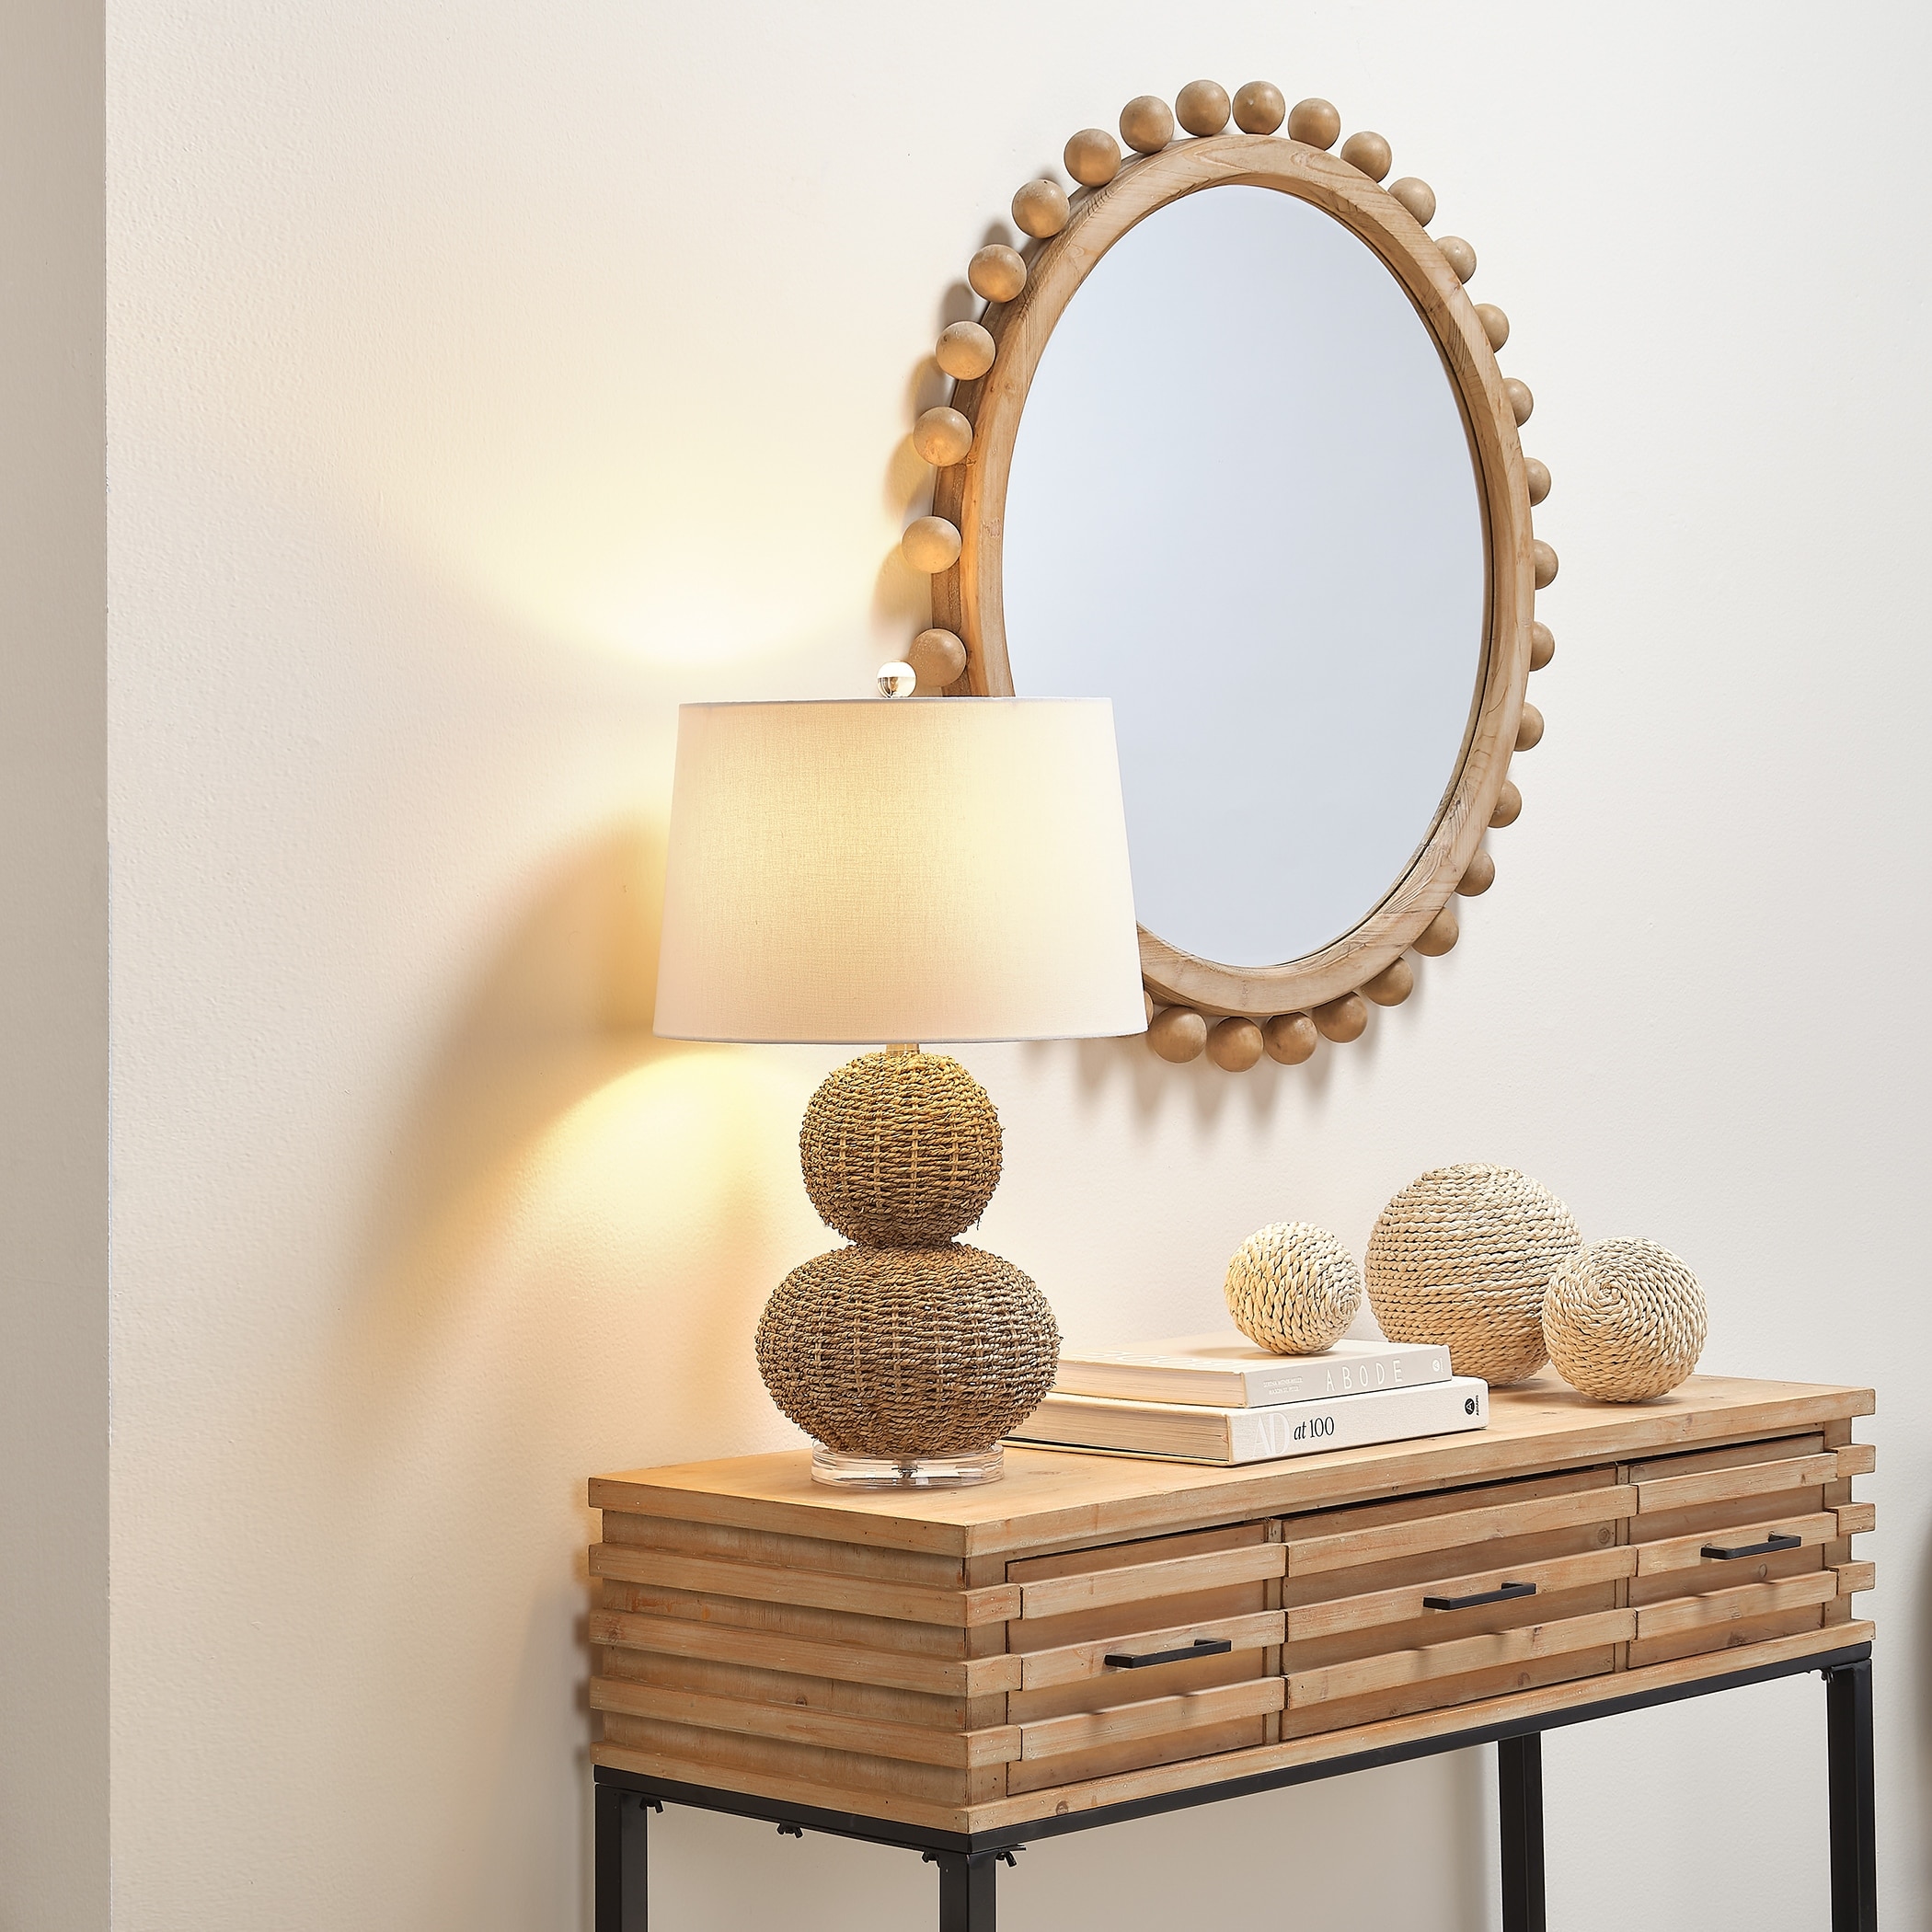 Decorative Circle Mirrors for sale in Chagrin Falls, Ohio